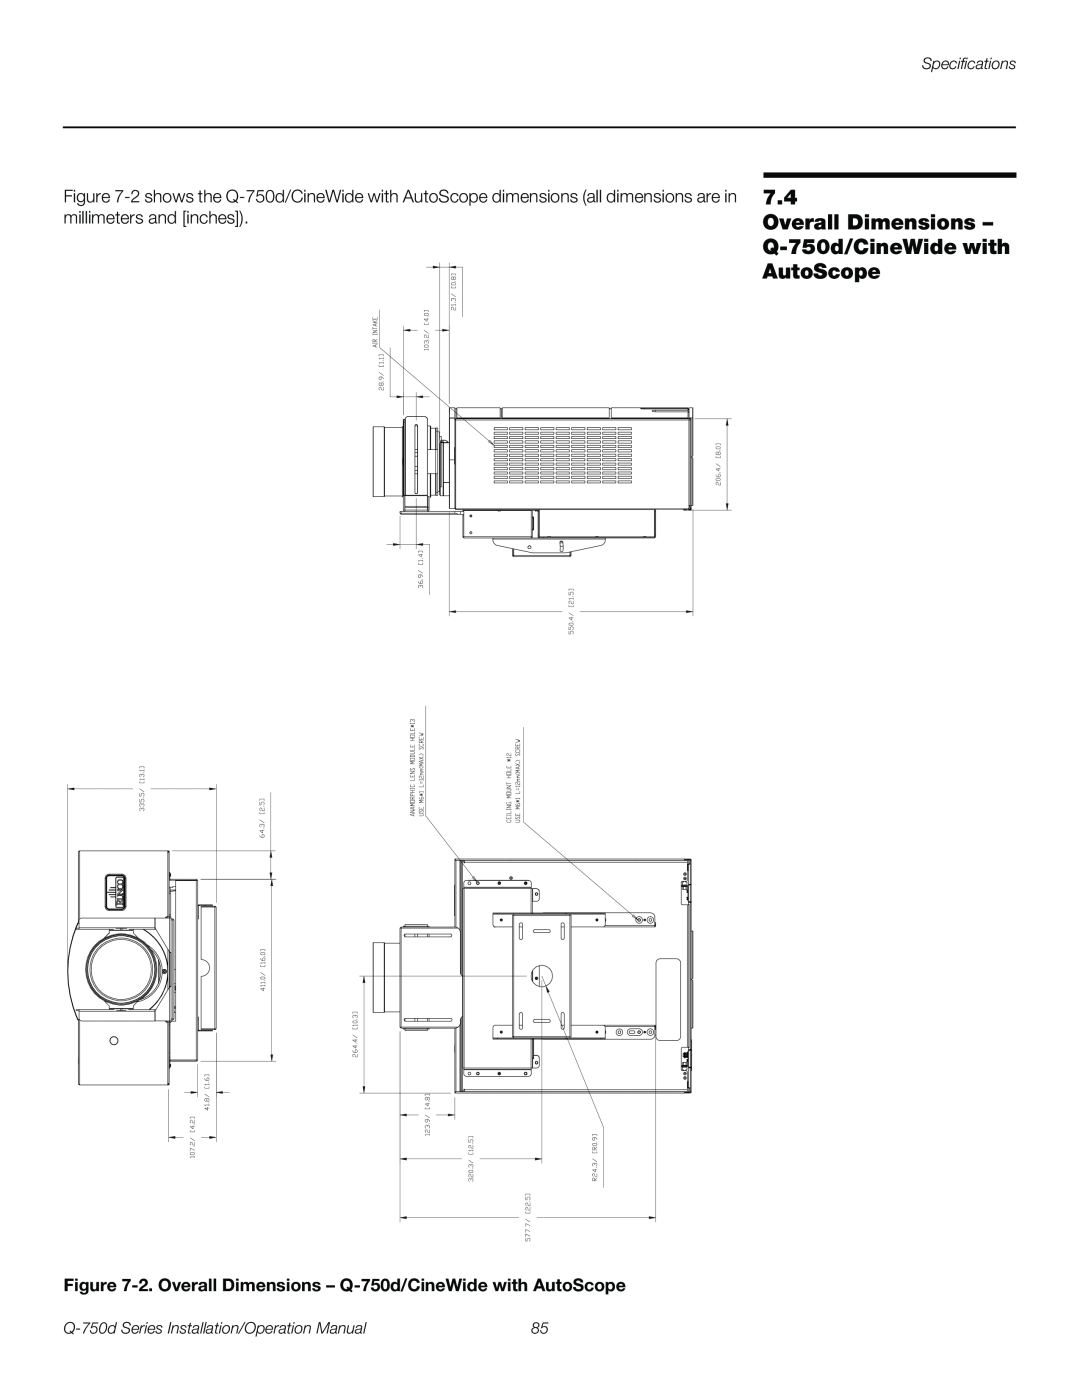 Runco Q-750D operation manual Specifications, Q-750dSeries Installation/Operation Manual 